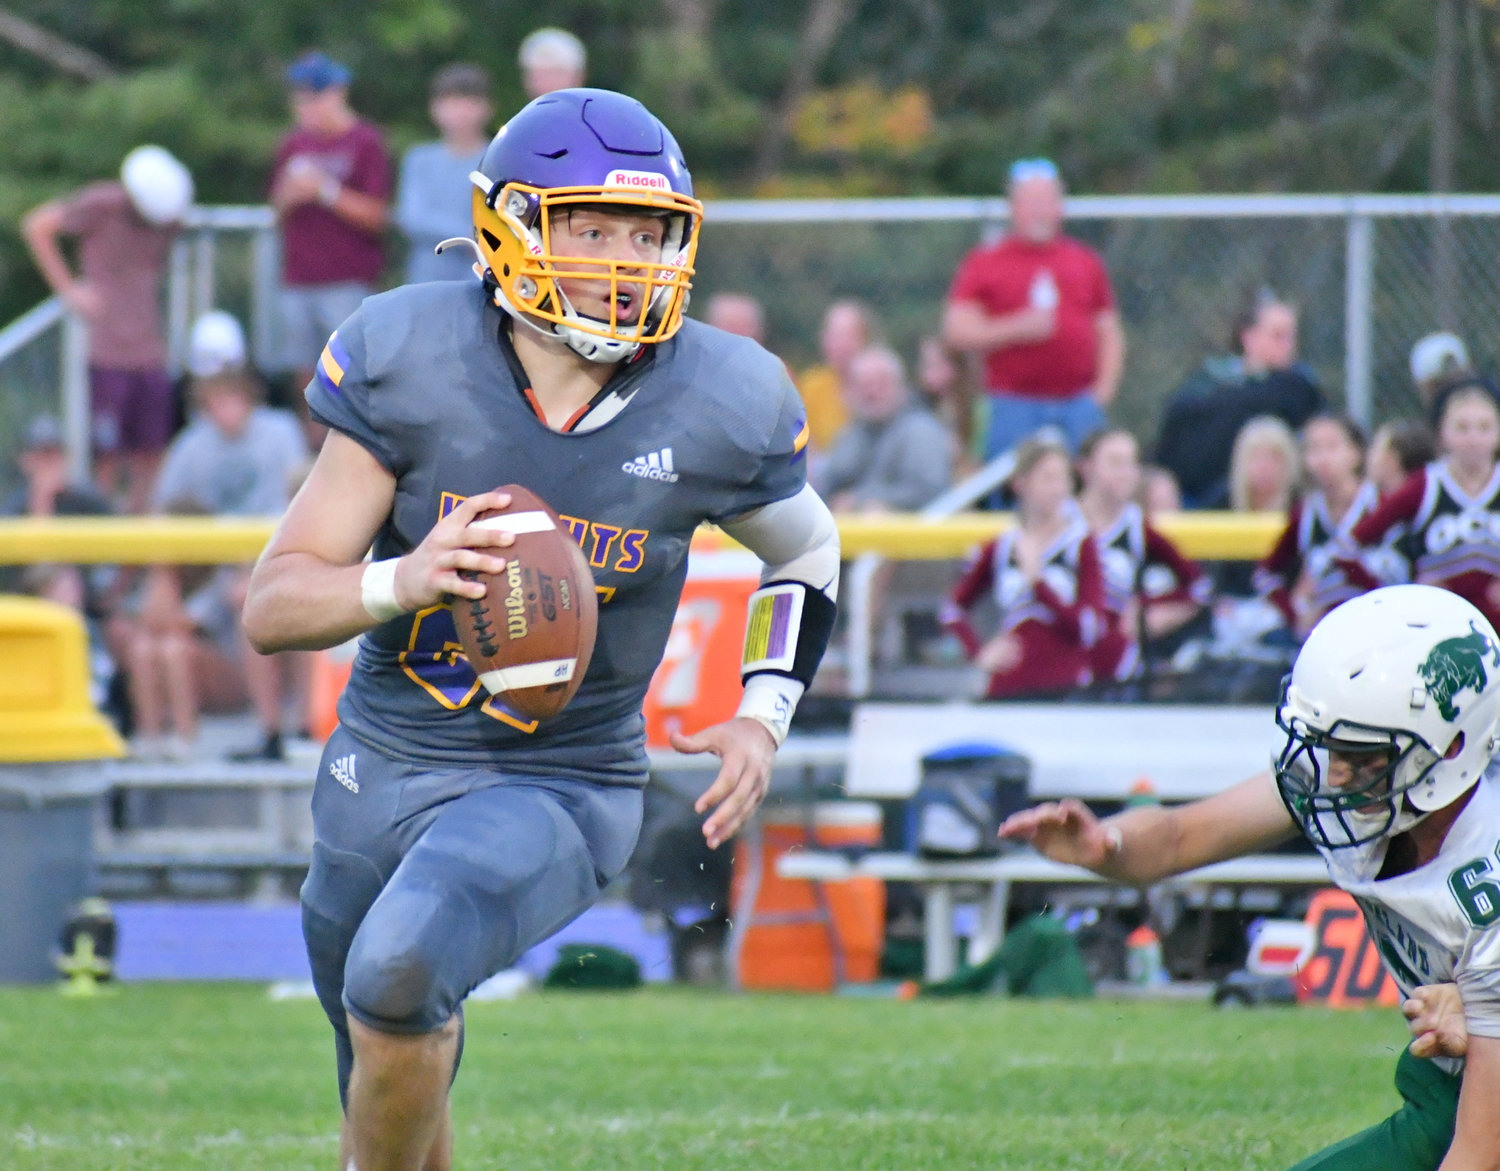 Holland Patent quarterback Jonathan Zylynksi rolls out and looks for an open target against Westmoreland-Oriskany at home Saturday night. The Golden Knights won 43-8.